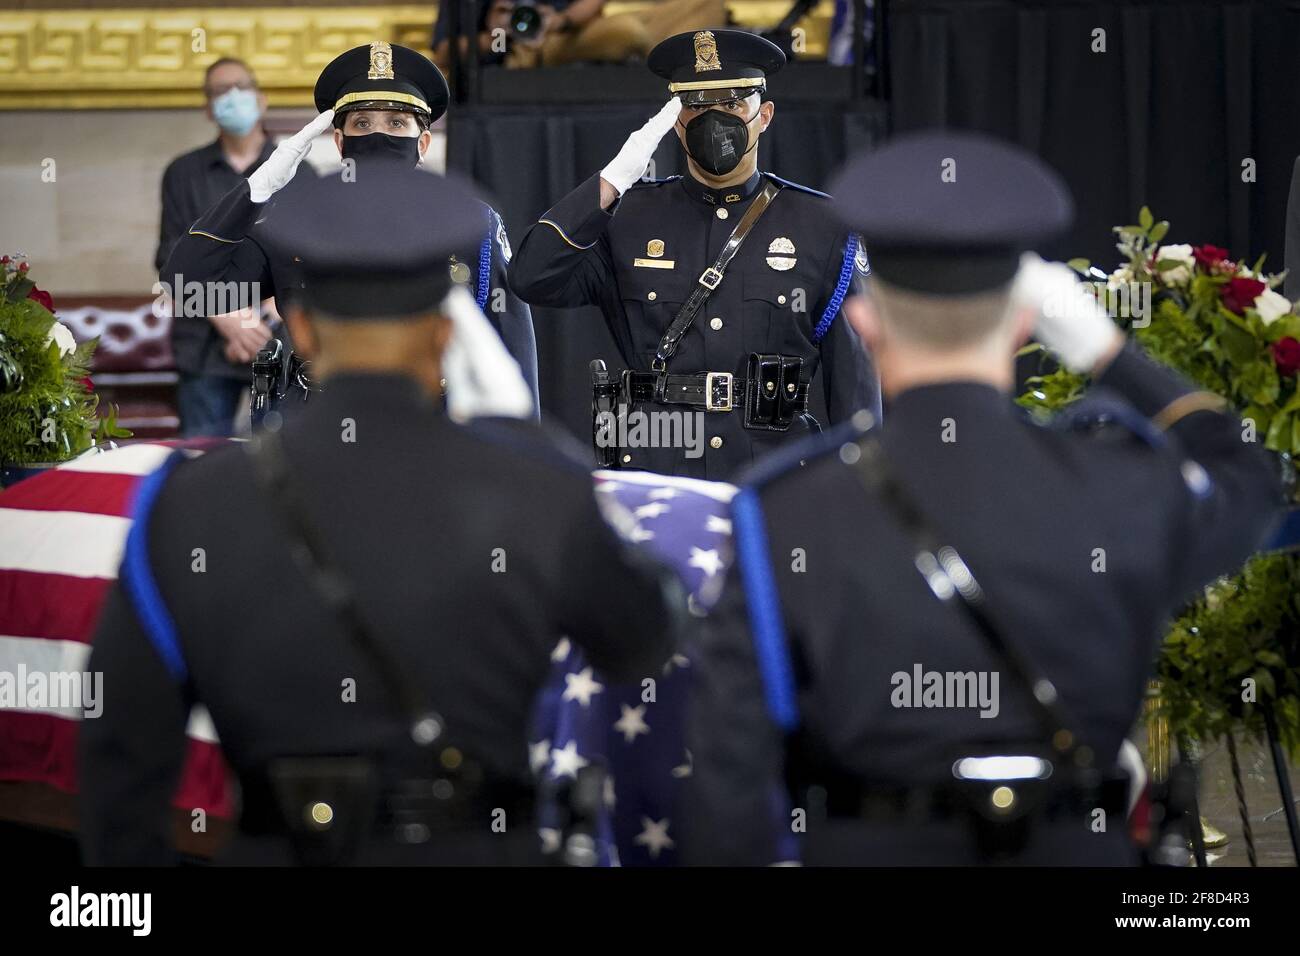 Members of a Capitol Police honor guard salute at the casket of the late U.S. Capitol Police officer William 'Billy' Evans during a memorial service as Evans lies in honor in the Rotunda at the U.S. Capitol in Washington DC, on Tuesday April 13, 2021. Evans was killed in the line of duty during the attack outside the U.S. Capitol on April 2. Pool photo by Drew Angerer/UPI Credit: UPI/Alamy Live News Stock Photo